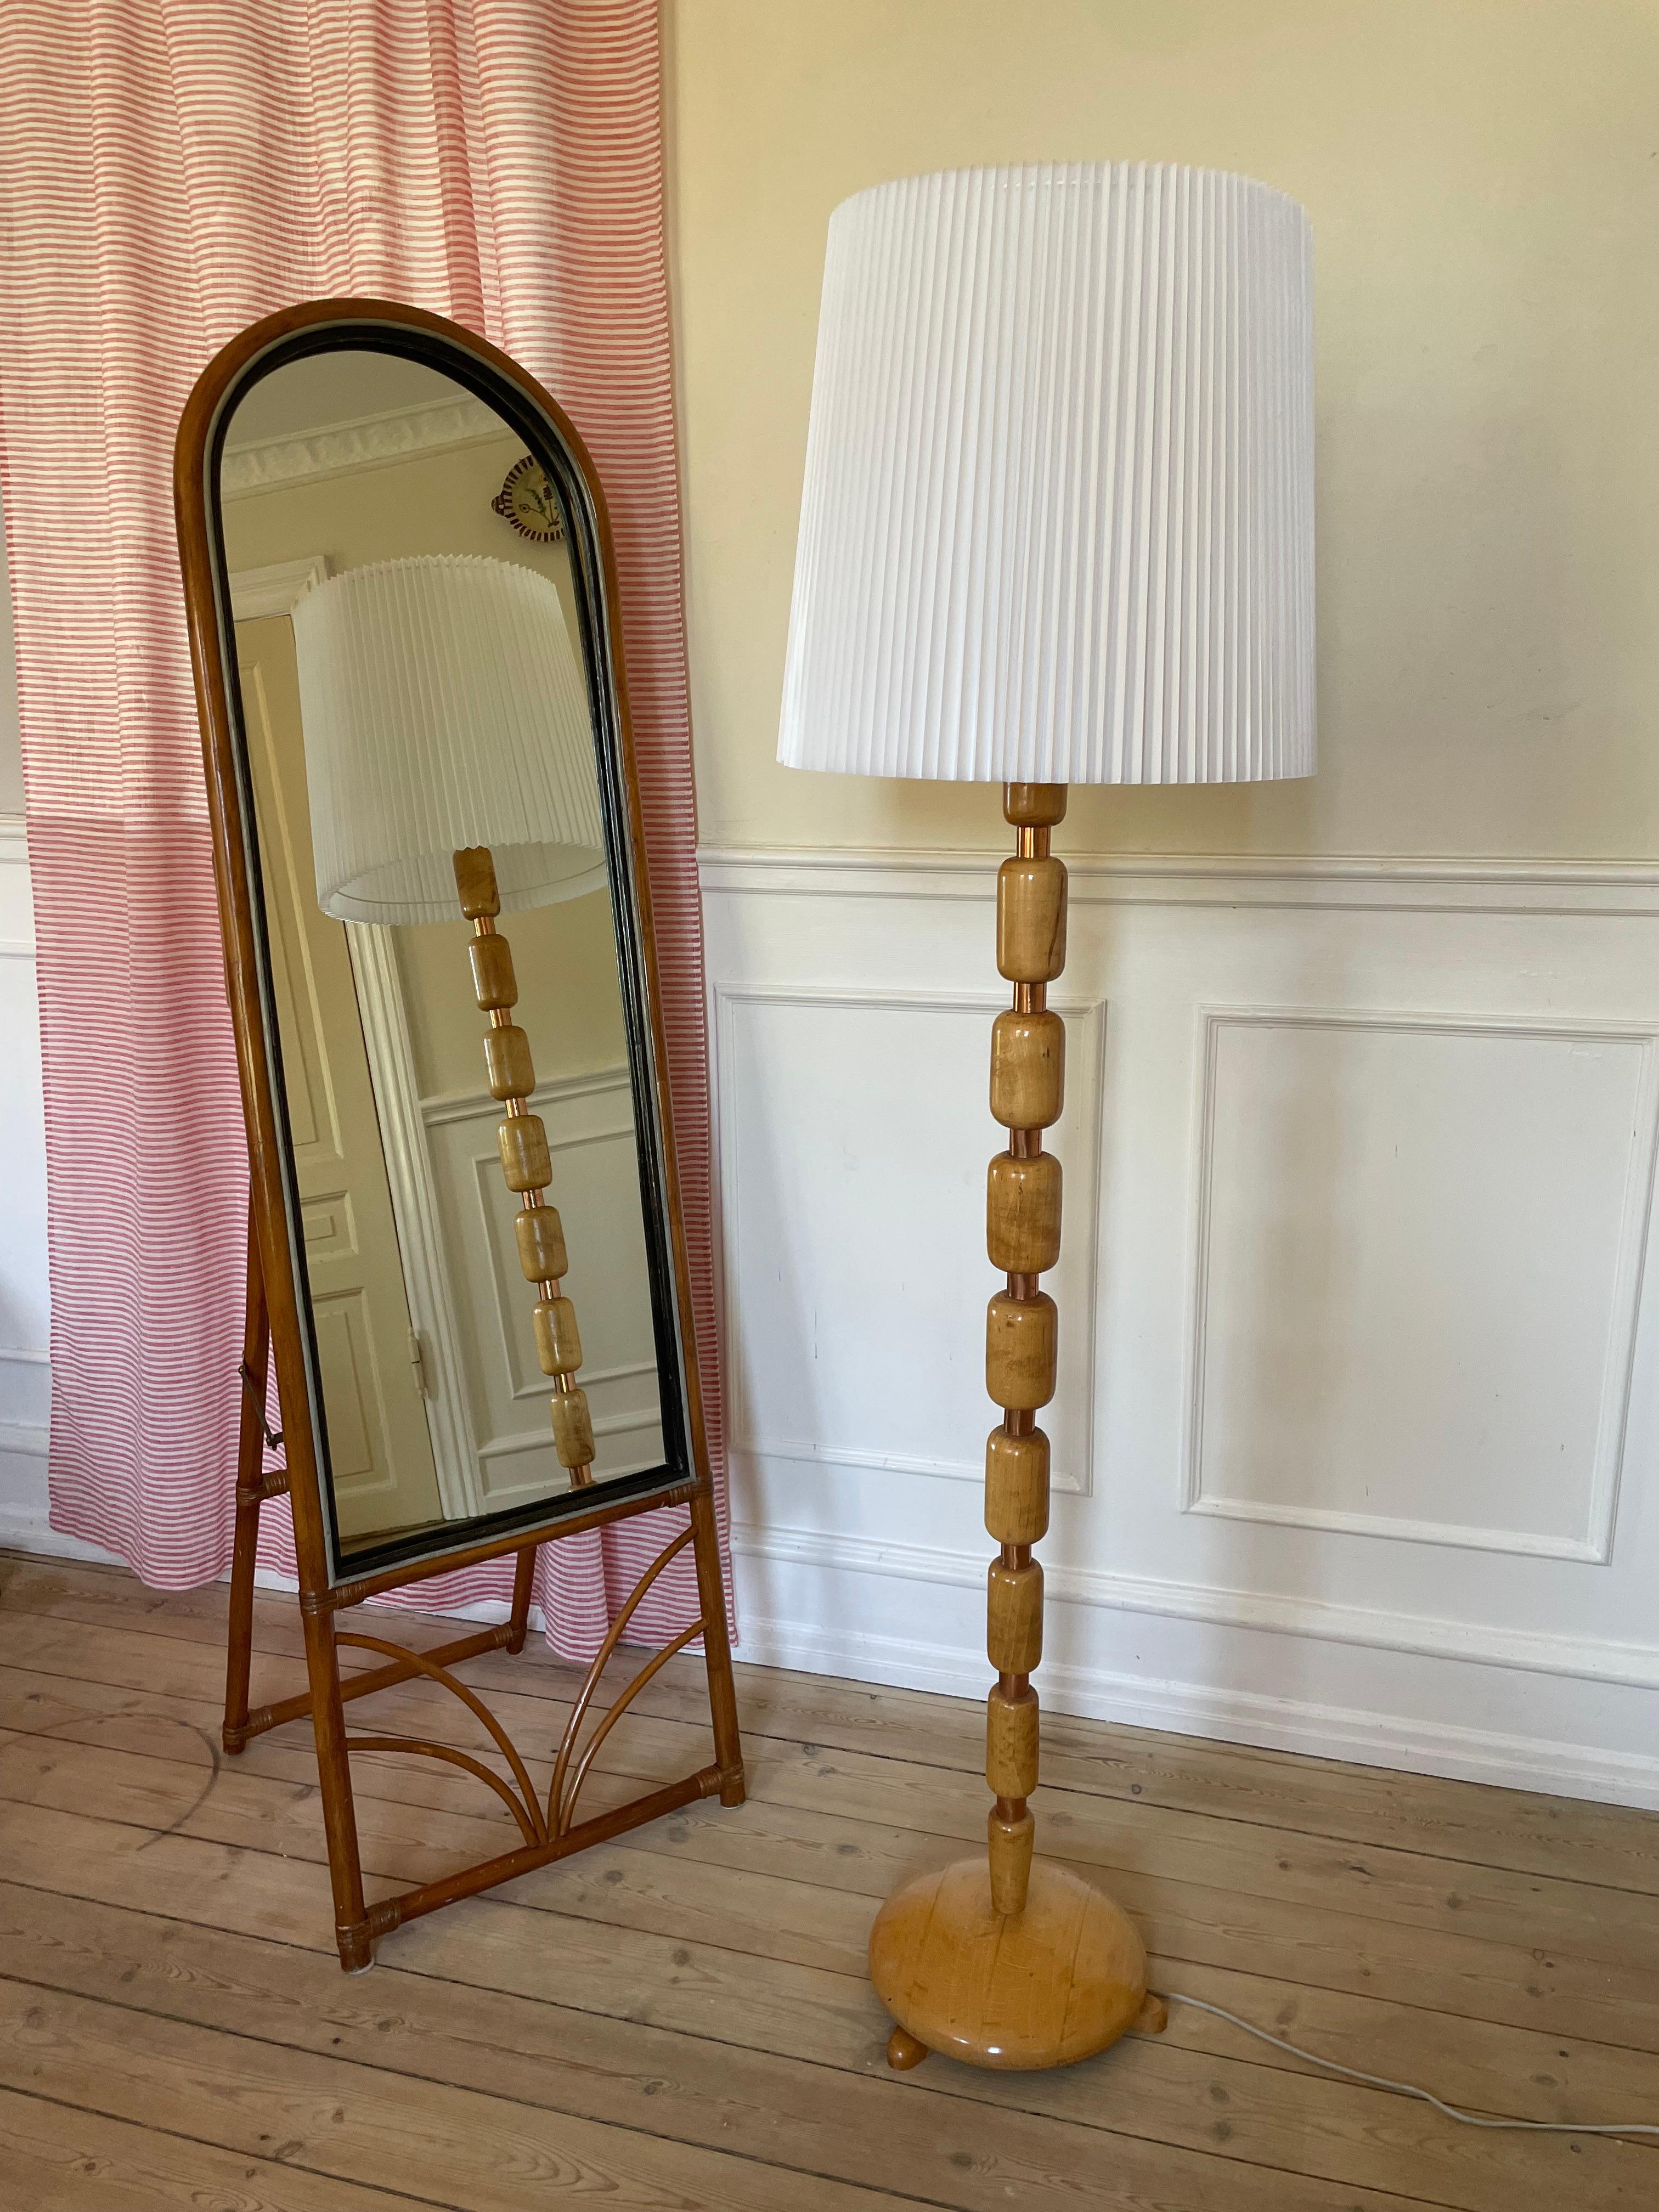 1950s organic modernist wooden floor lamp. Large lacquered oblong shaped pine wood sections interchanging with rose golden colored metal giving the piece a structural, architectural look. Round solid lacquered wood base with three small feet.